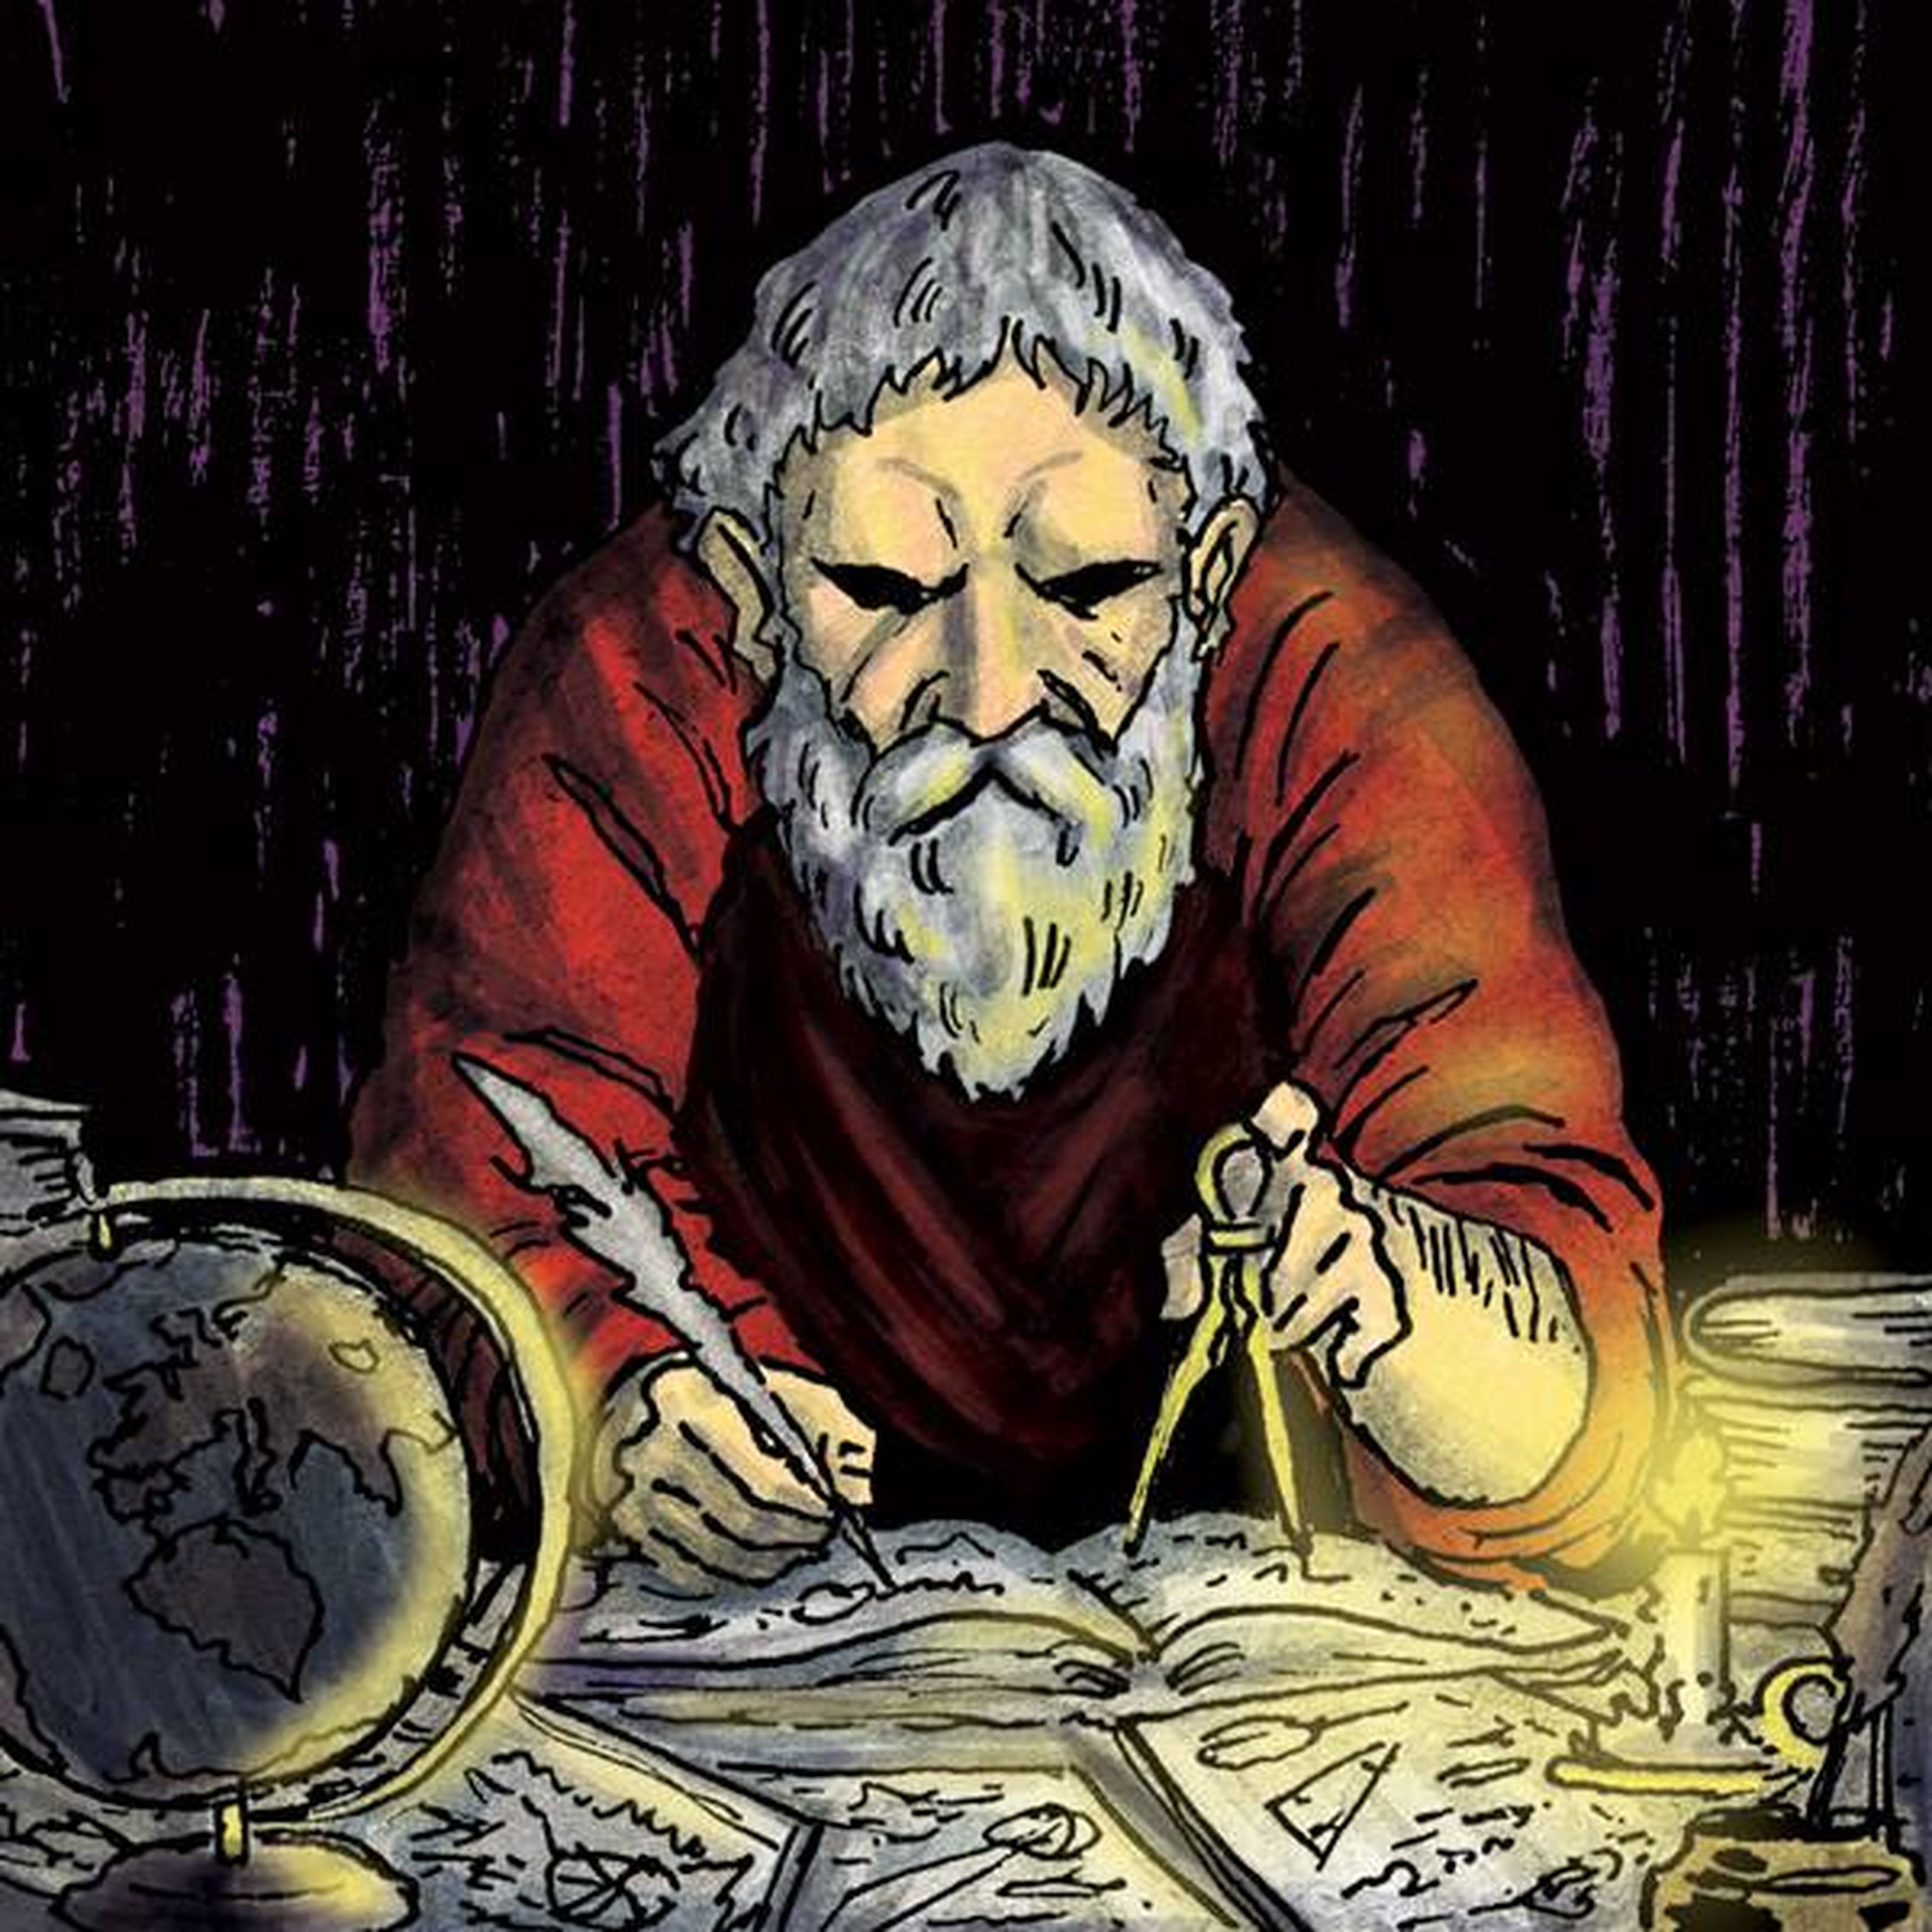 Episode #34- Did Archimedes Build a Death Ray?